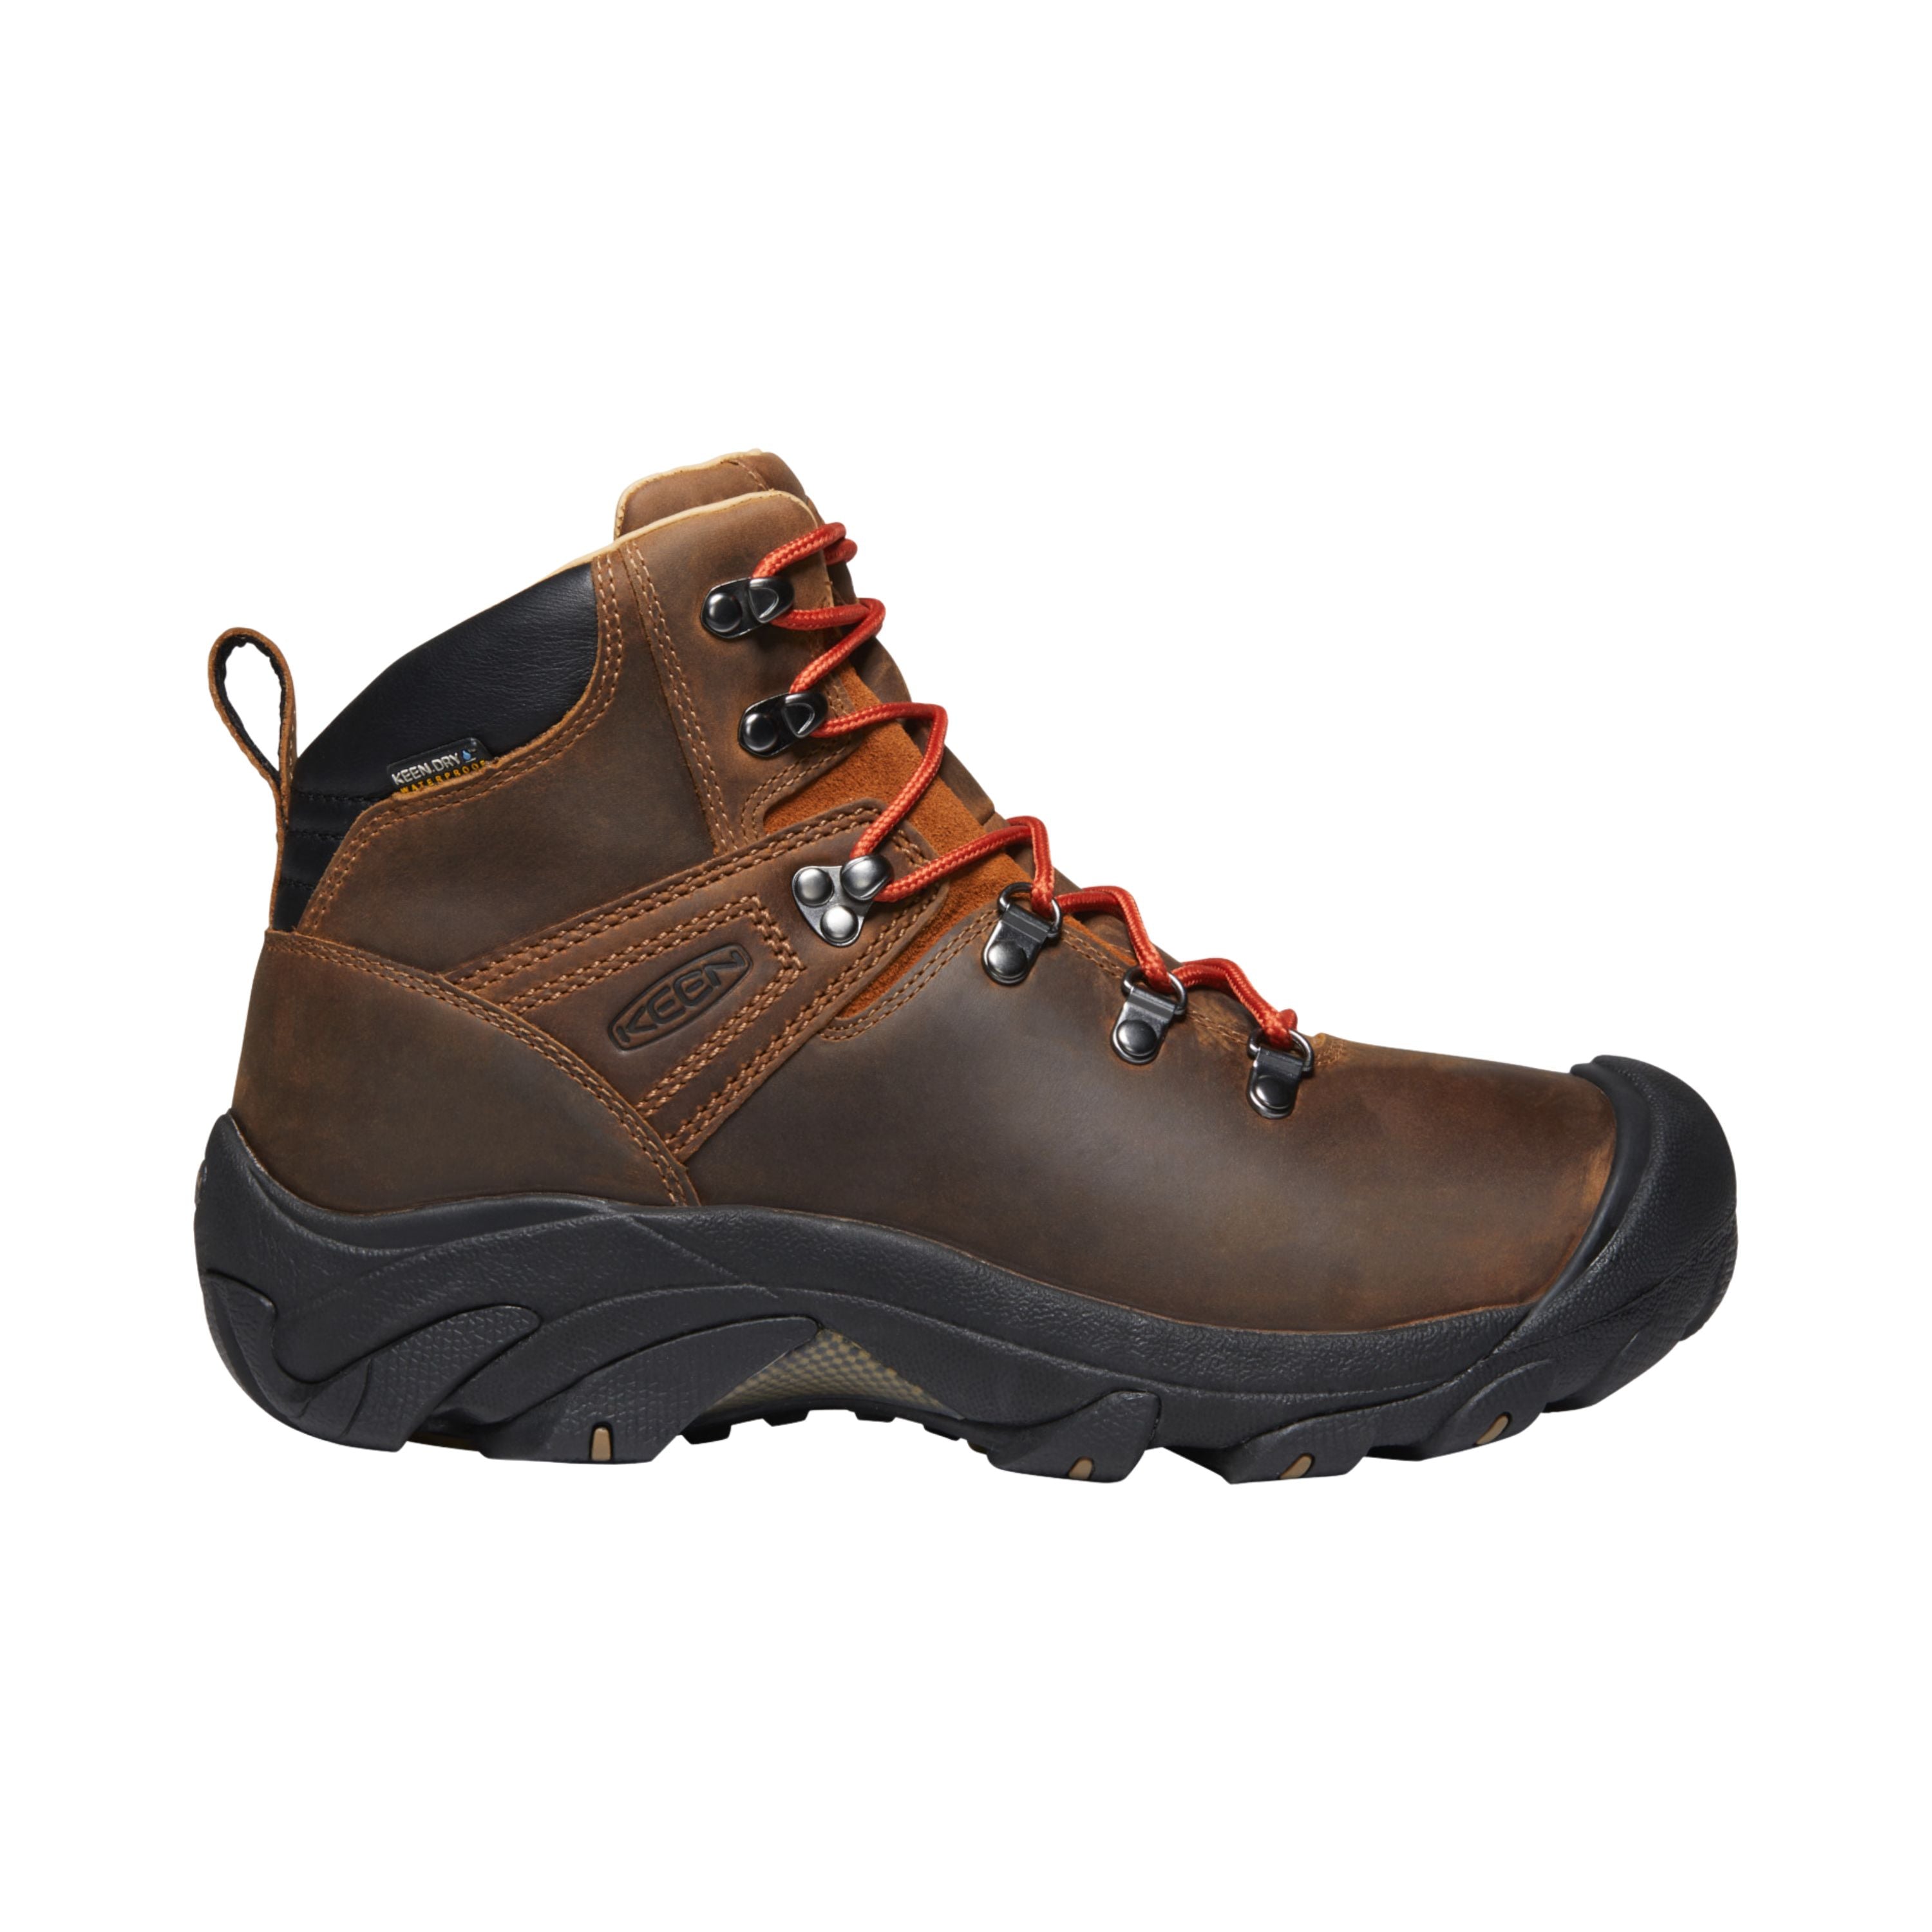 "Pyrenees" Hiking boots - Women's